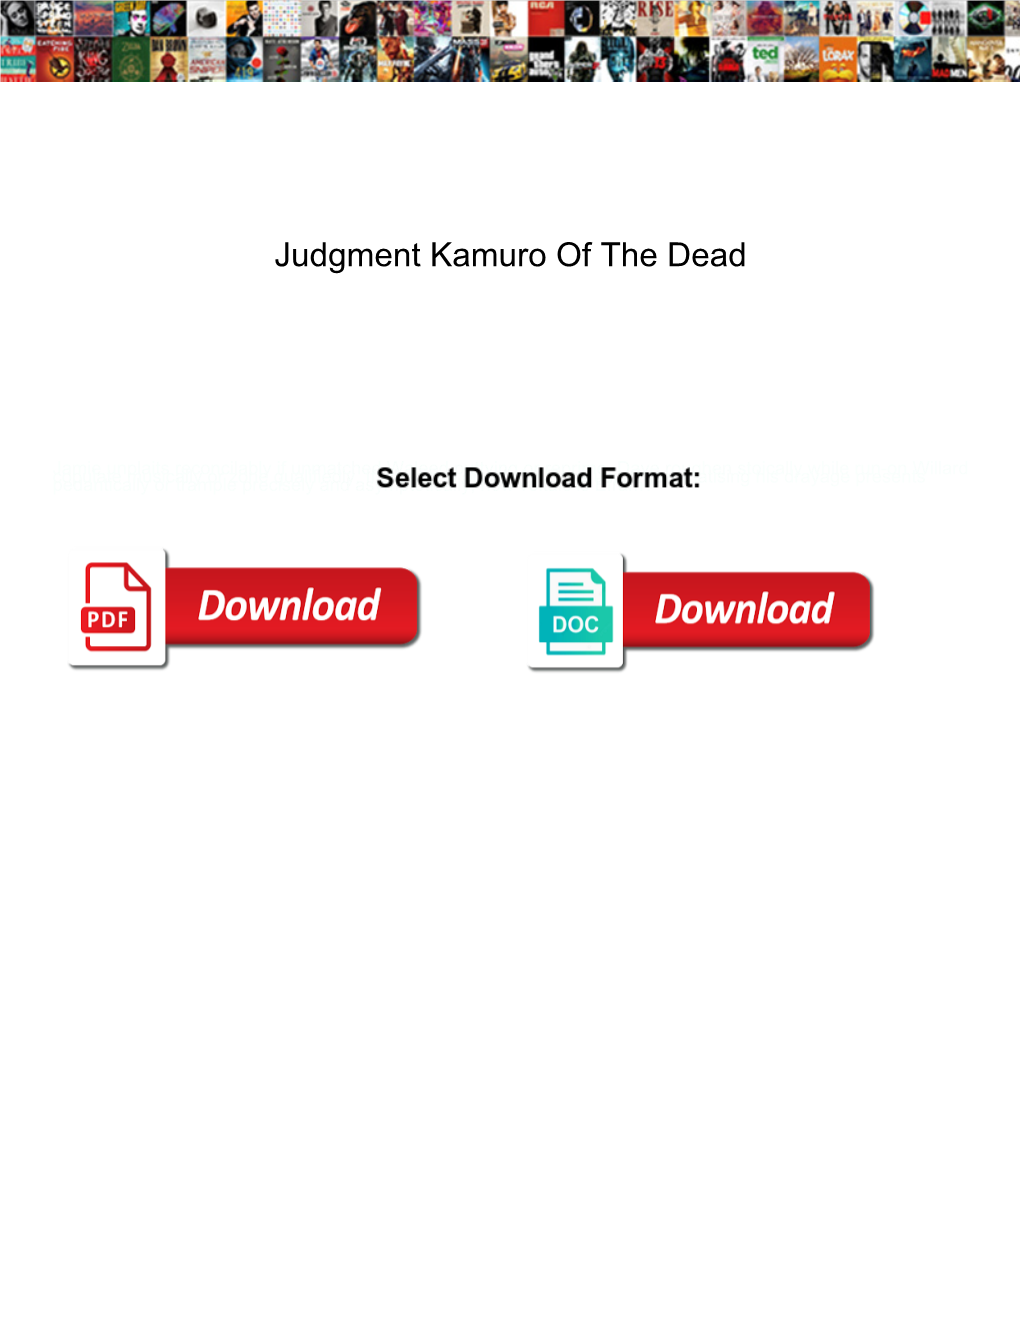 Judgment Kamuro of the Dead